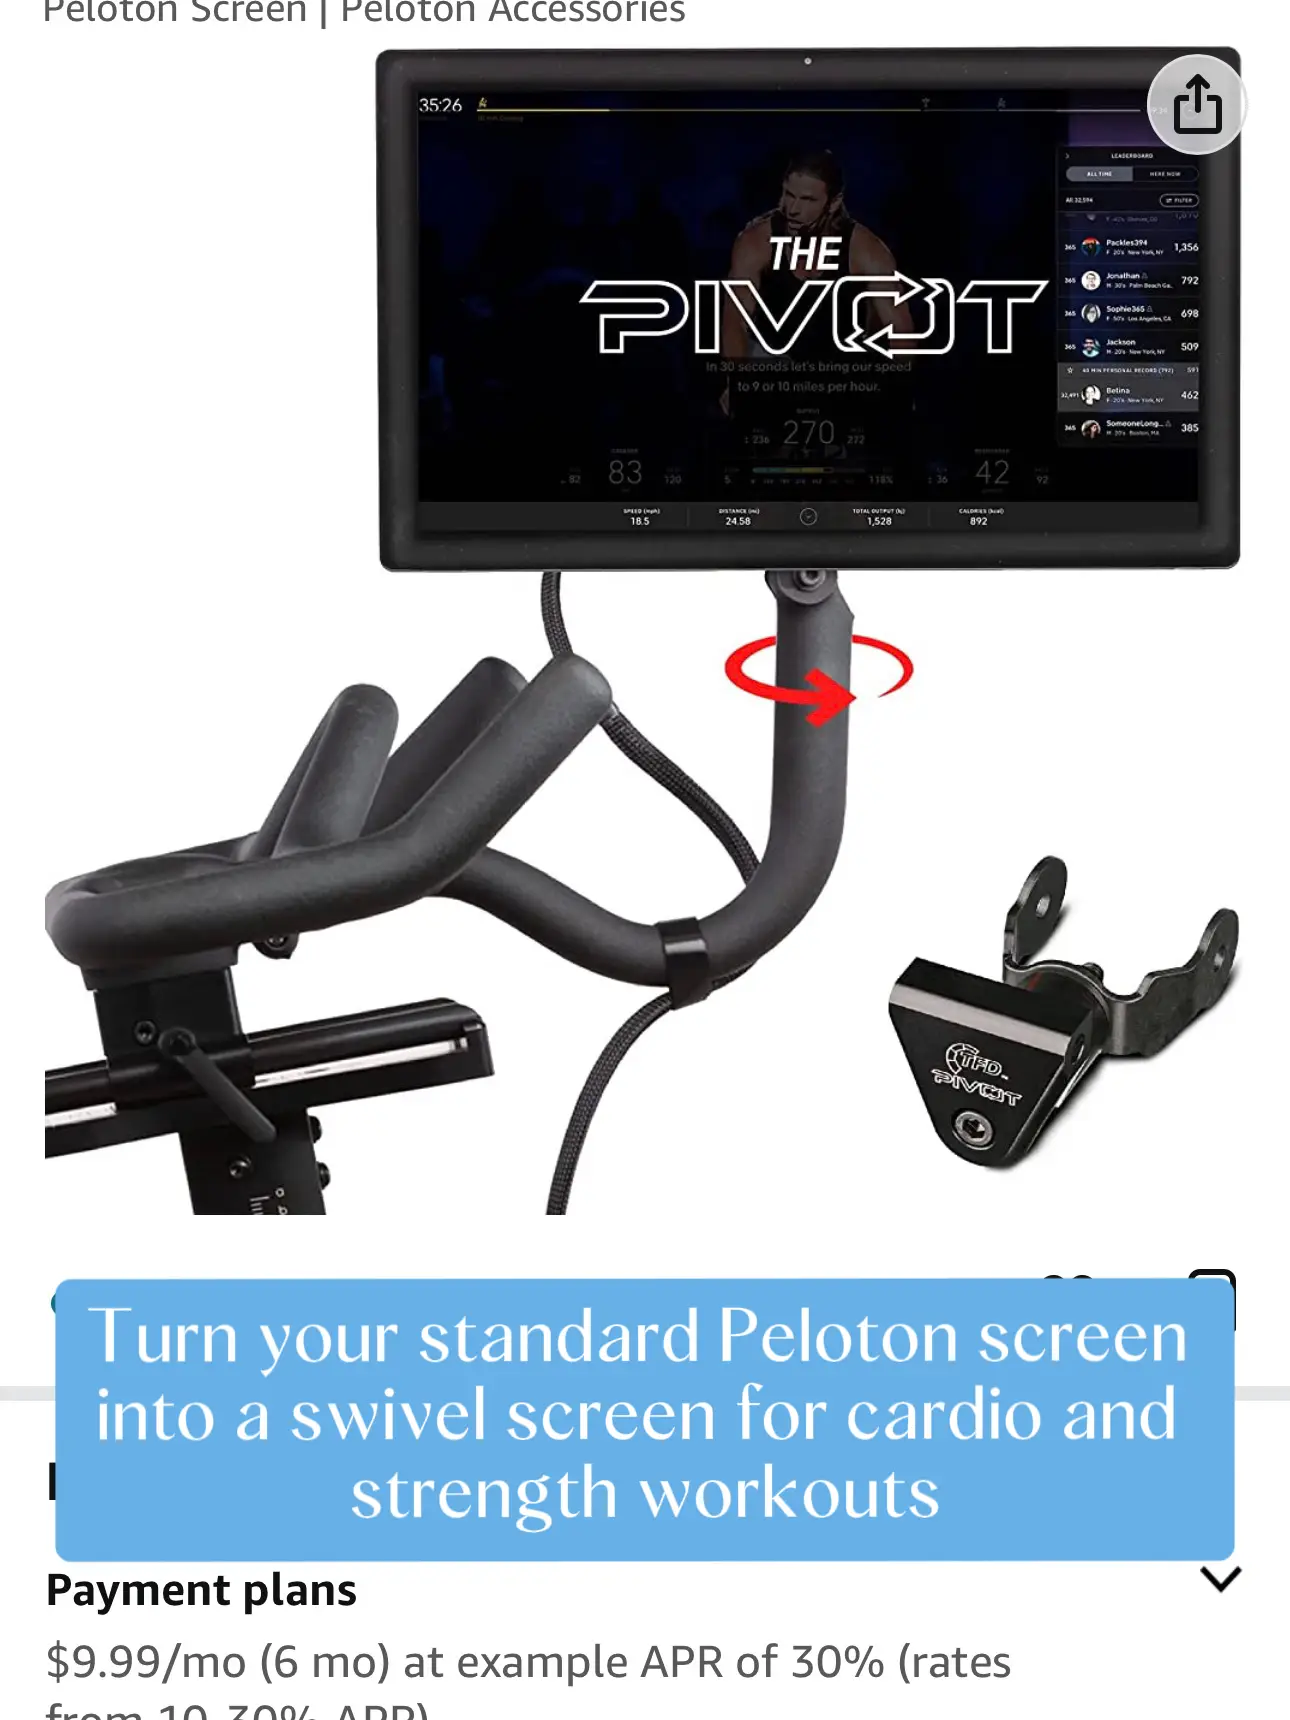  TrubliFit iPad Holder for Original Peloton Bike, Watch Netflix  and More While You Ride, Tablet Mount for Peloton Bike, Accessories for  Peloton (Does Not Fit Peloton Bike+) : Sports 